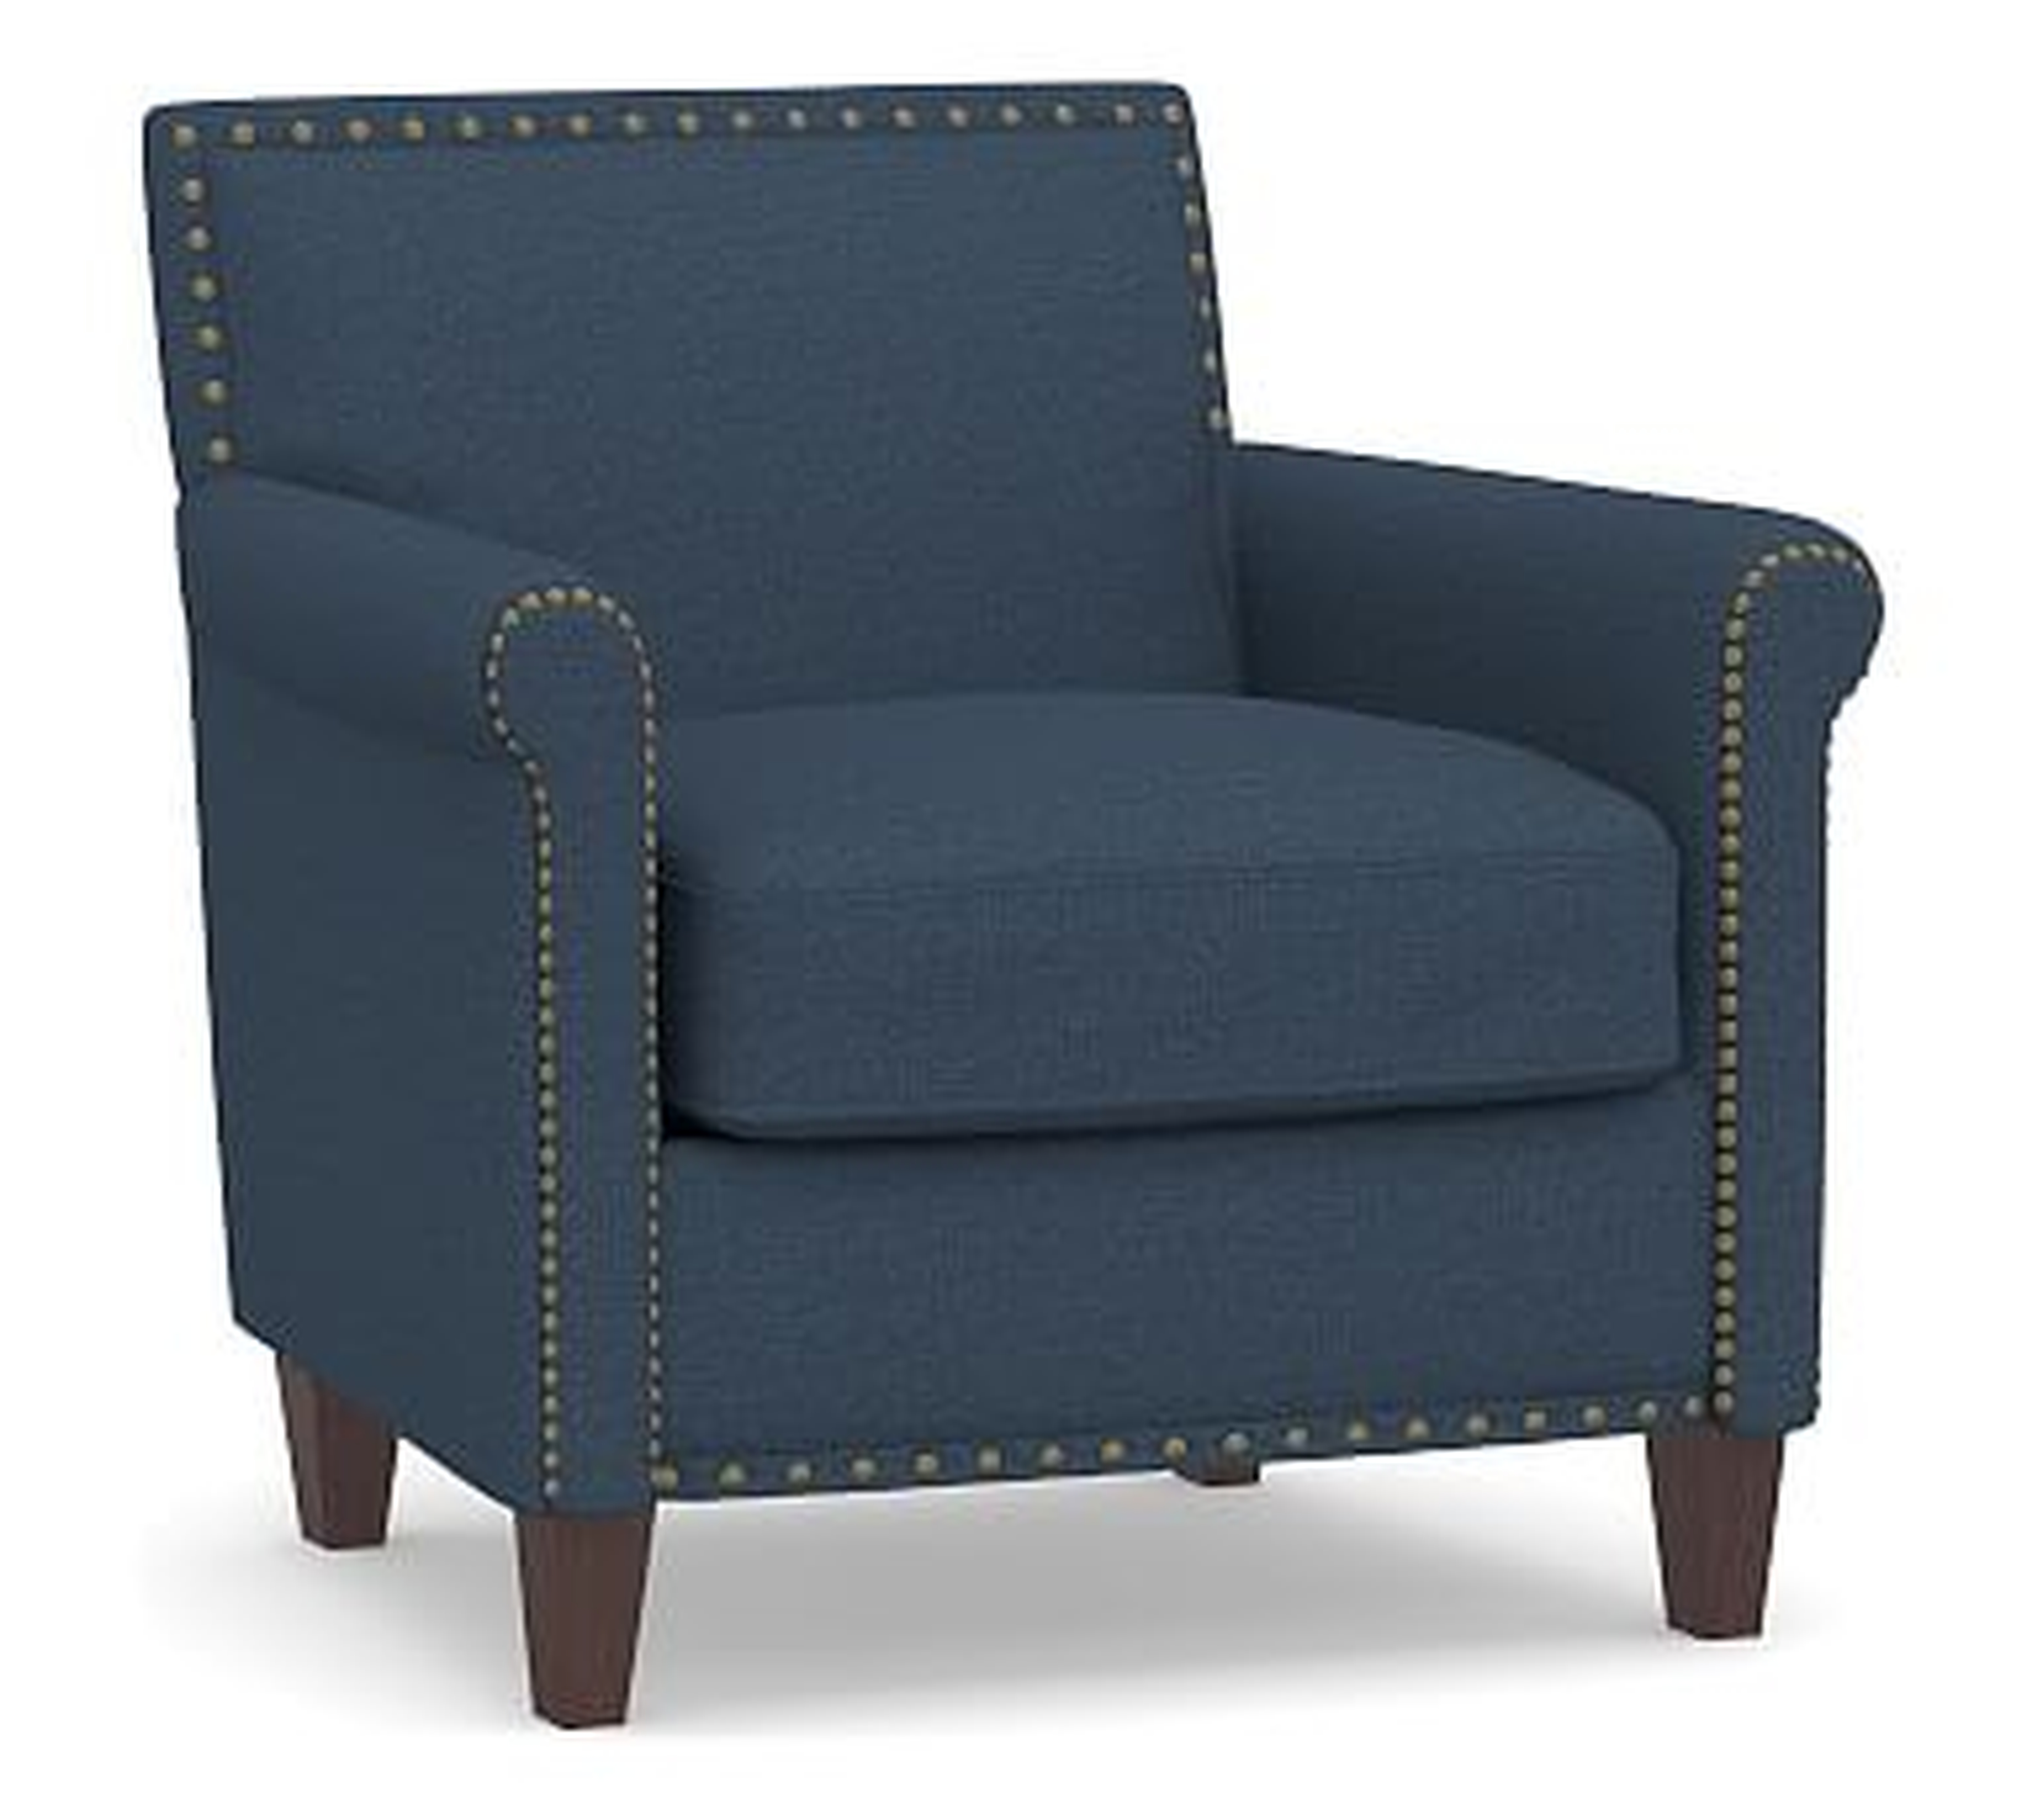 SoMa Roscoe Upholstered Armchair, Polyester Wrapped Cushions, Brushed Crossweave Navy - Pottery Barn